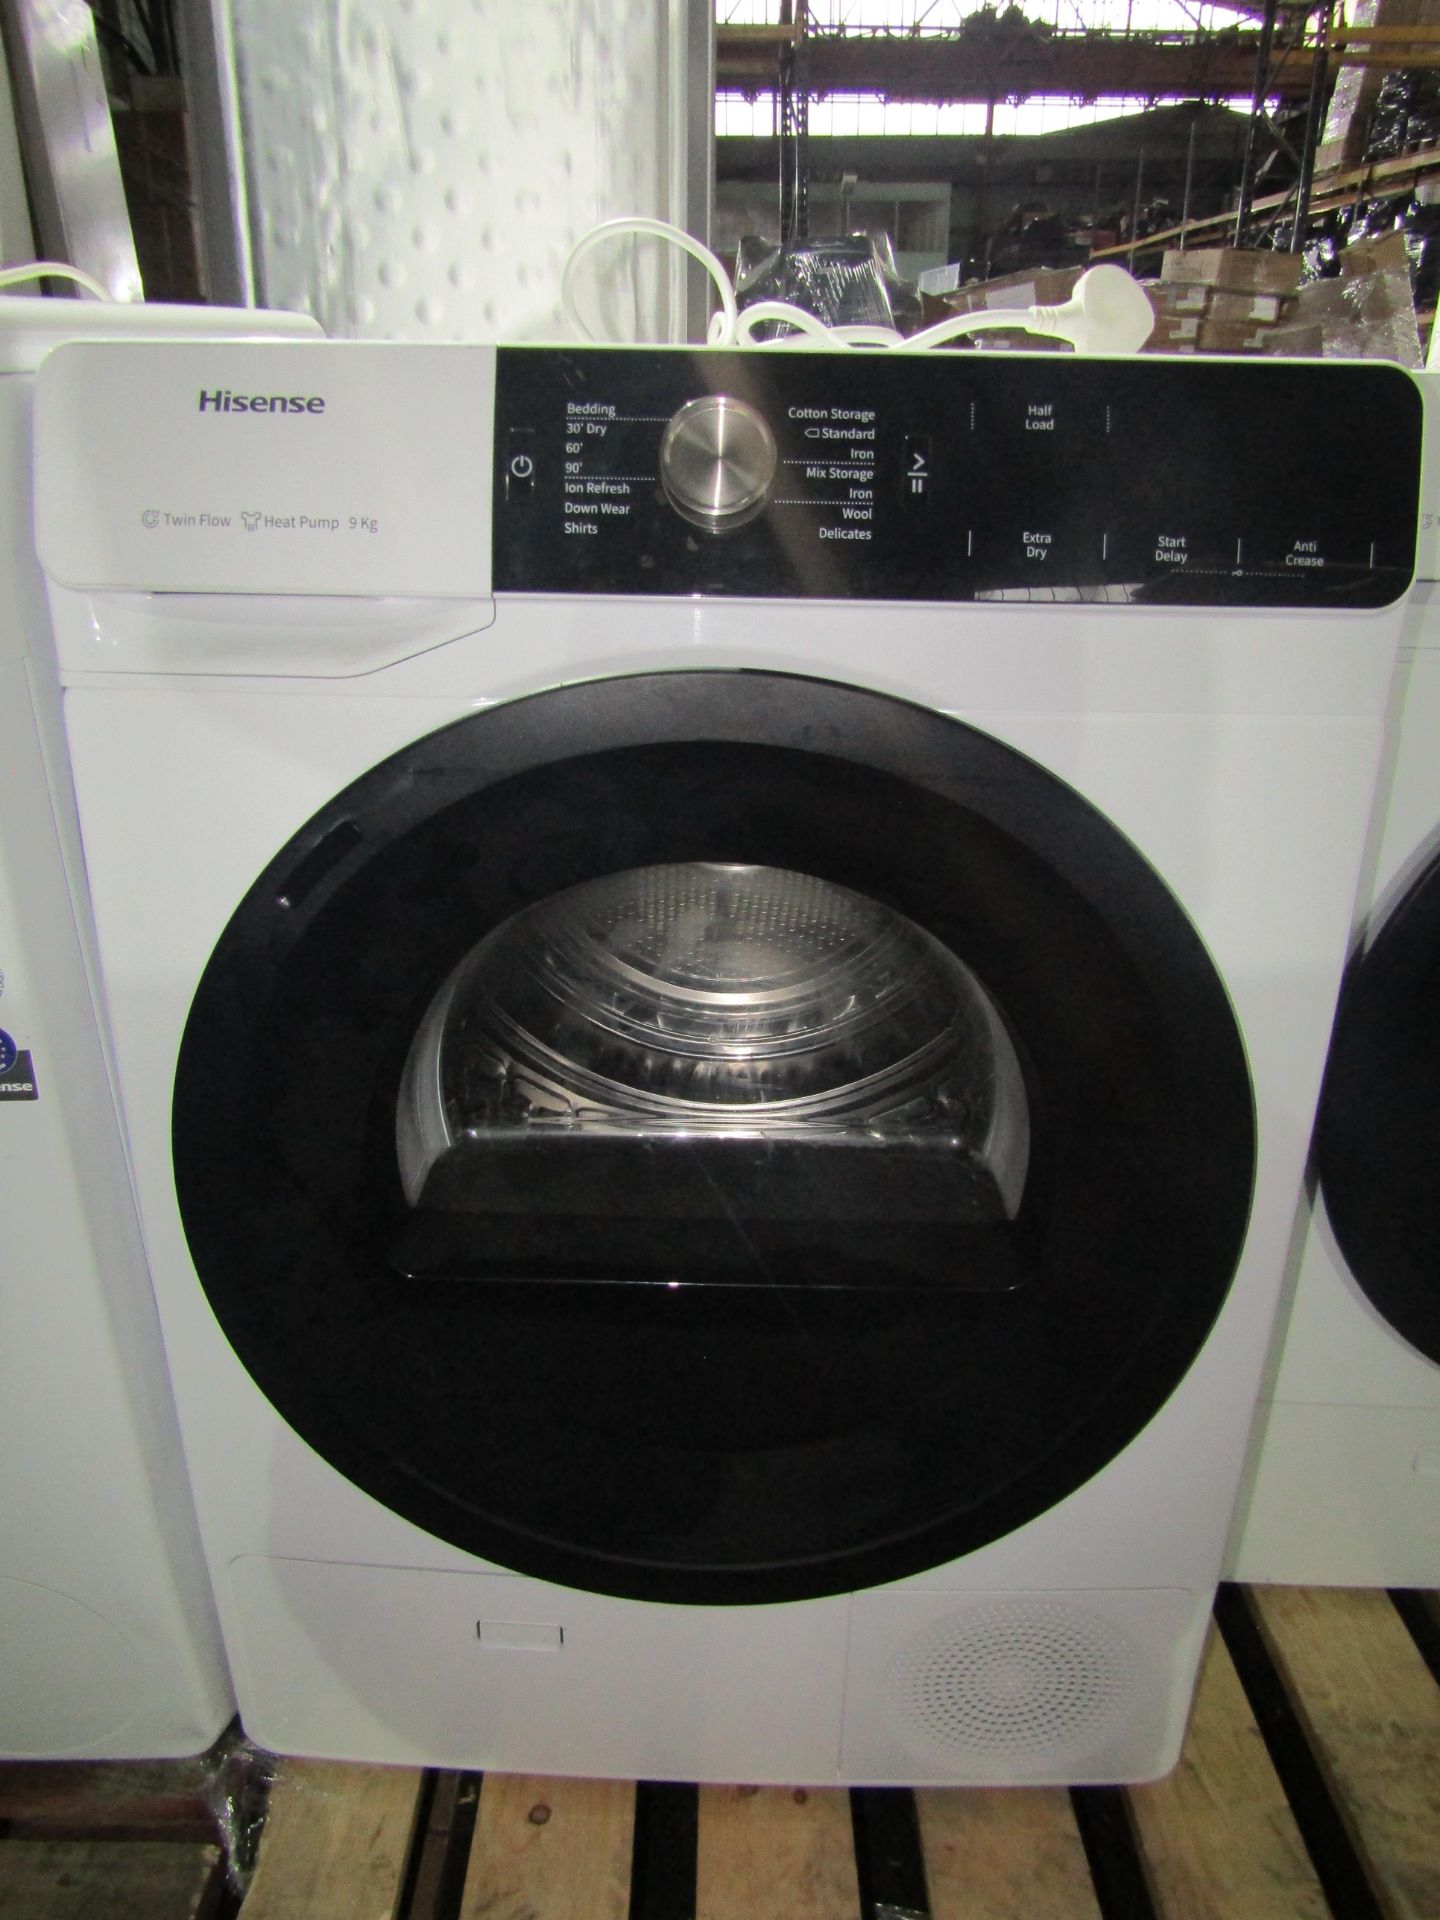 Hisense Dryer 9kg, Unable To Test Any Further As The Door Will Not Close, May Contain Scratches/